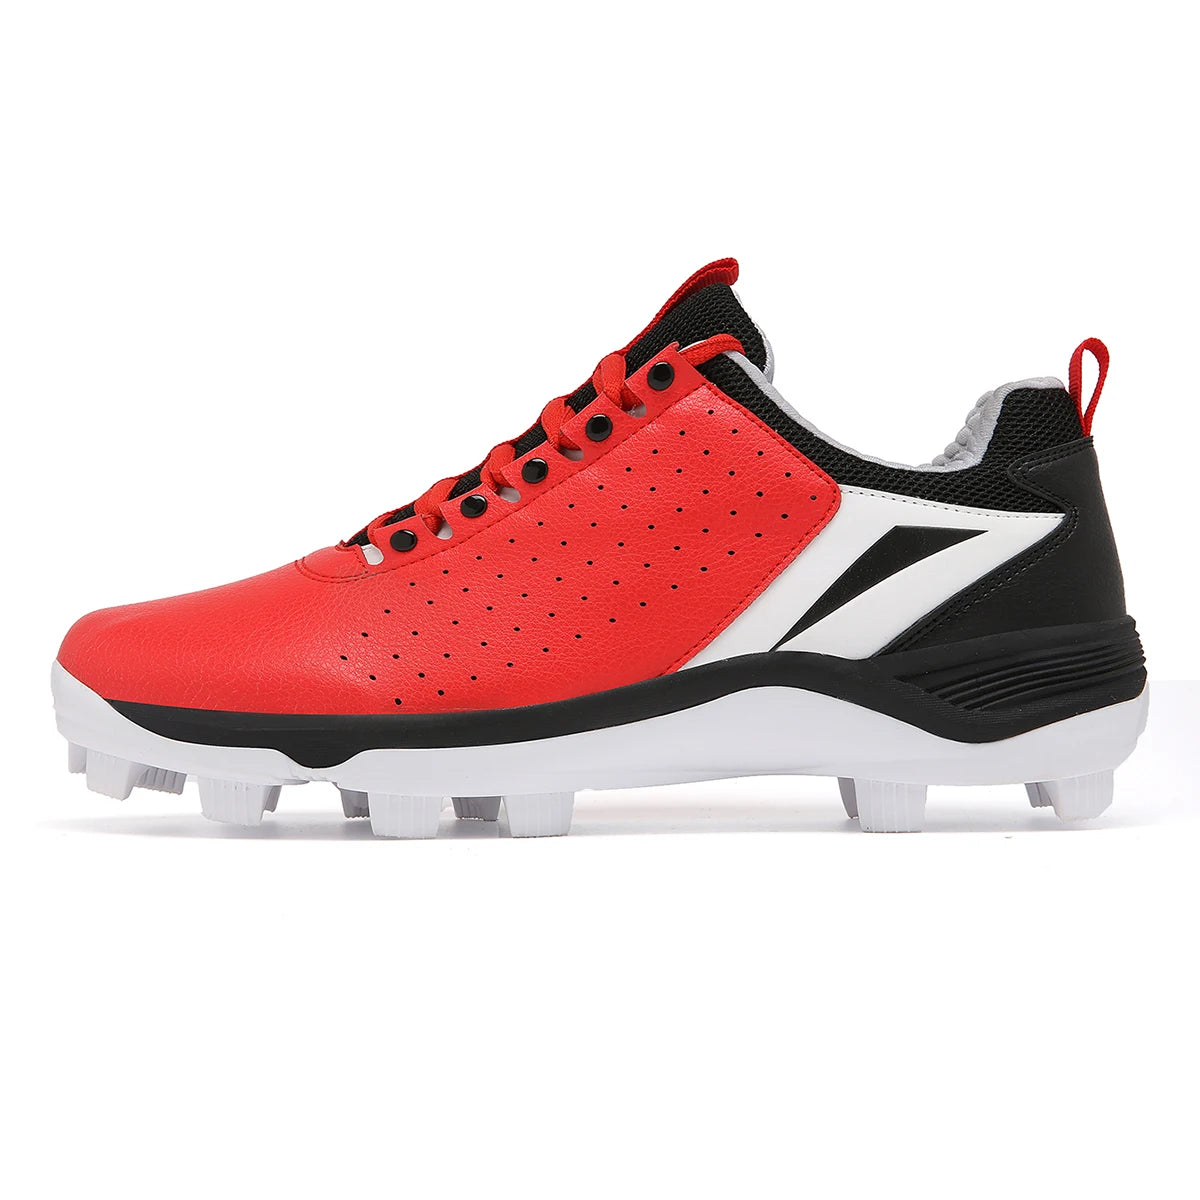 2024 Elite Men's Baseball Sneaker featuring breathable material, non-slip long spikes, and stylish design for superior athletic performance.